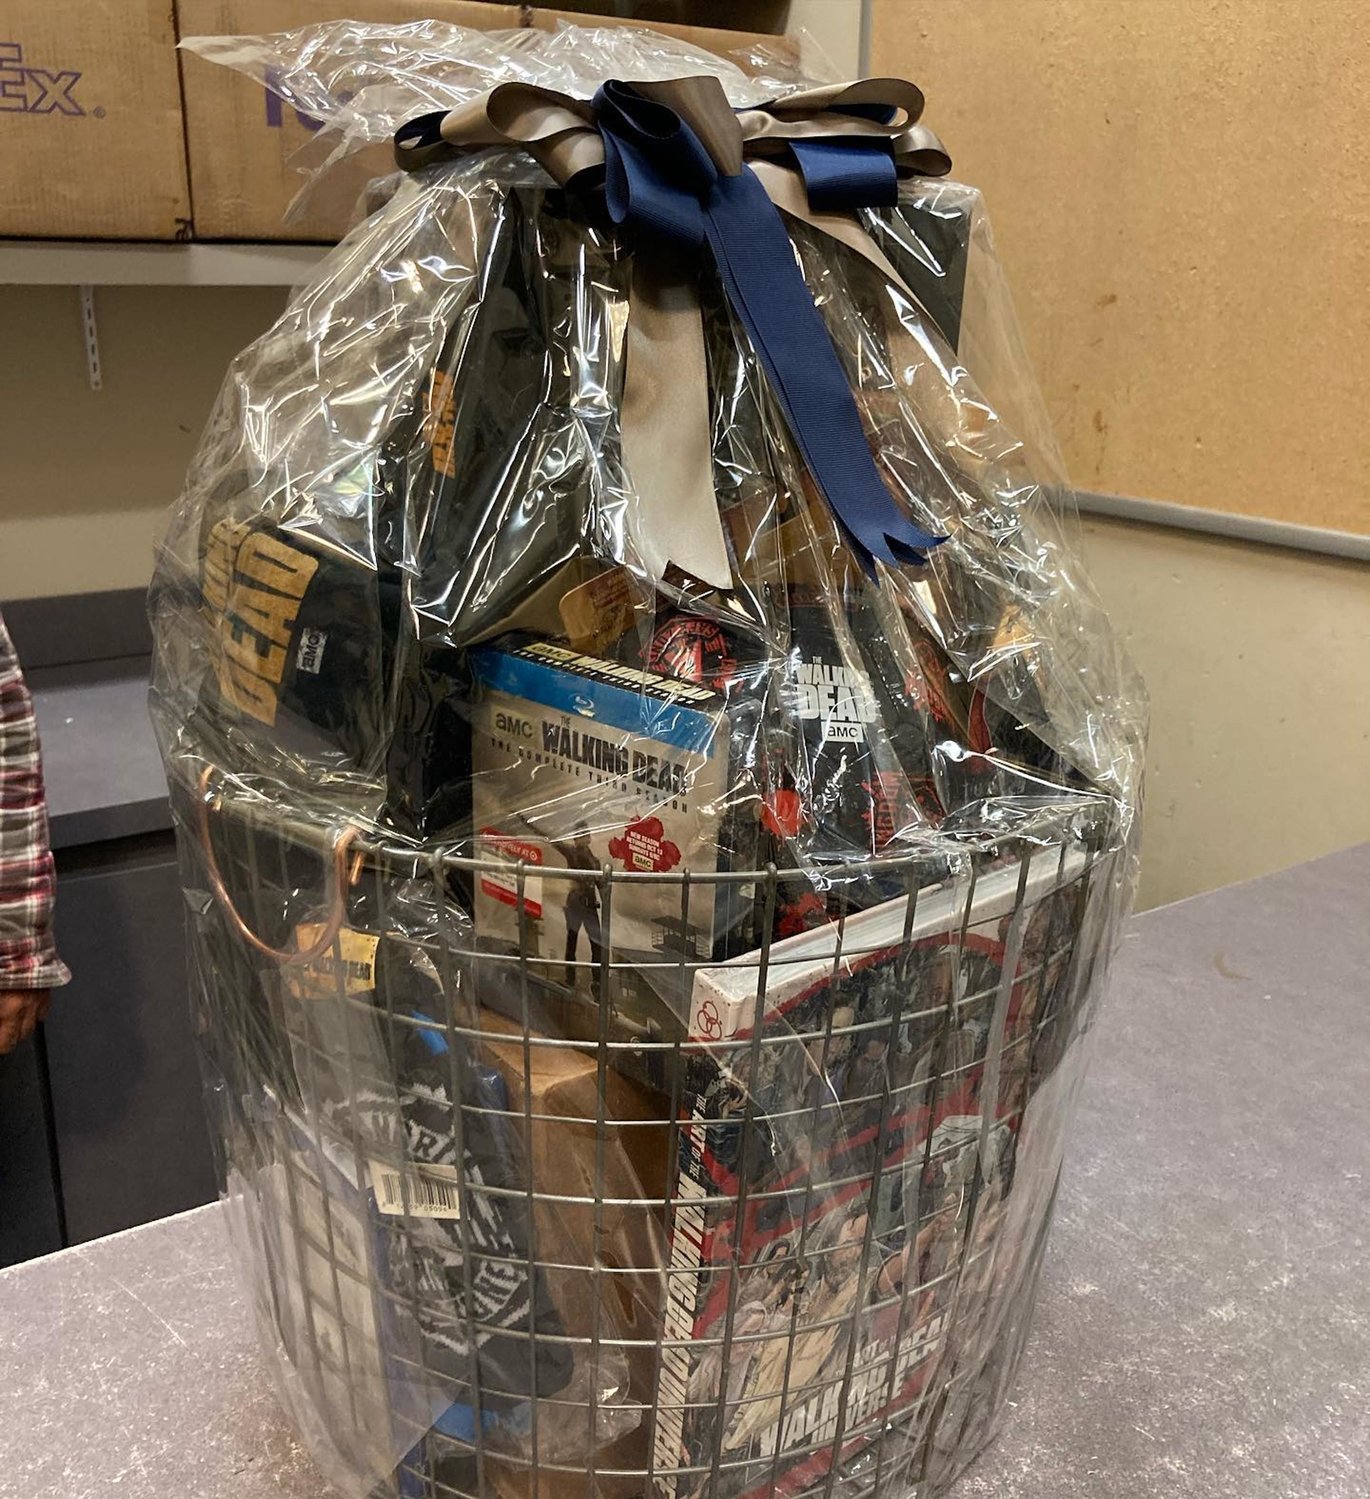 a basket with items from the AMC series “The Walking Dead” will also be raffled.